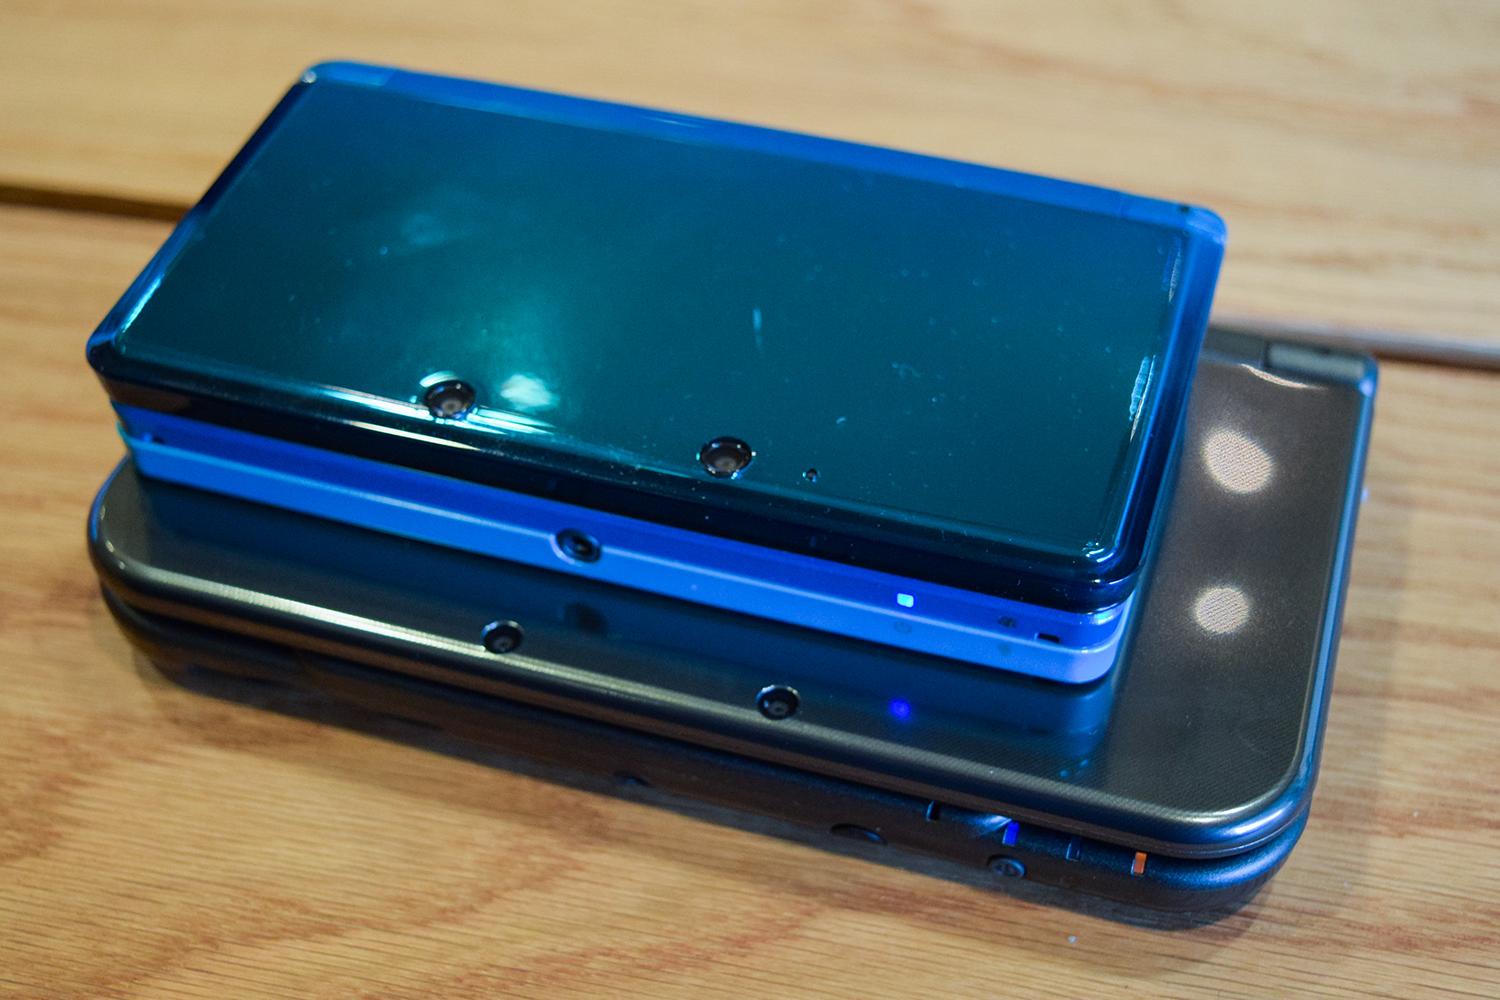 Nord crack stakåndet The Most Common Nintendo 3DS Problems and How to Fix Them | Digital Trends